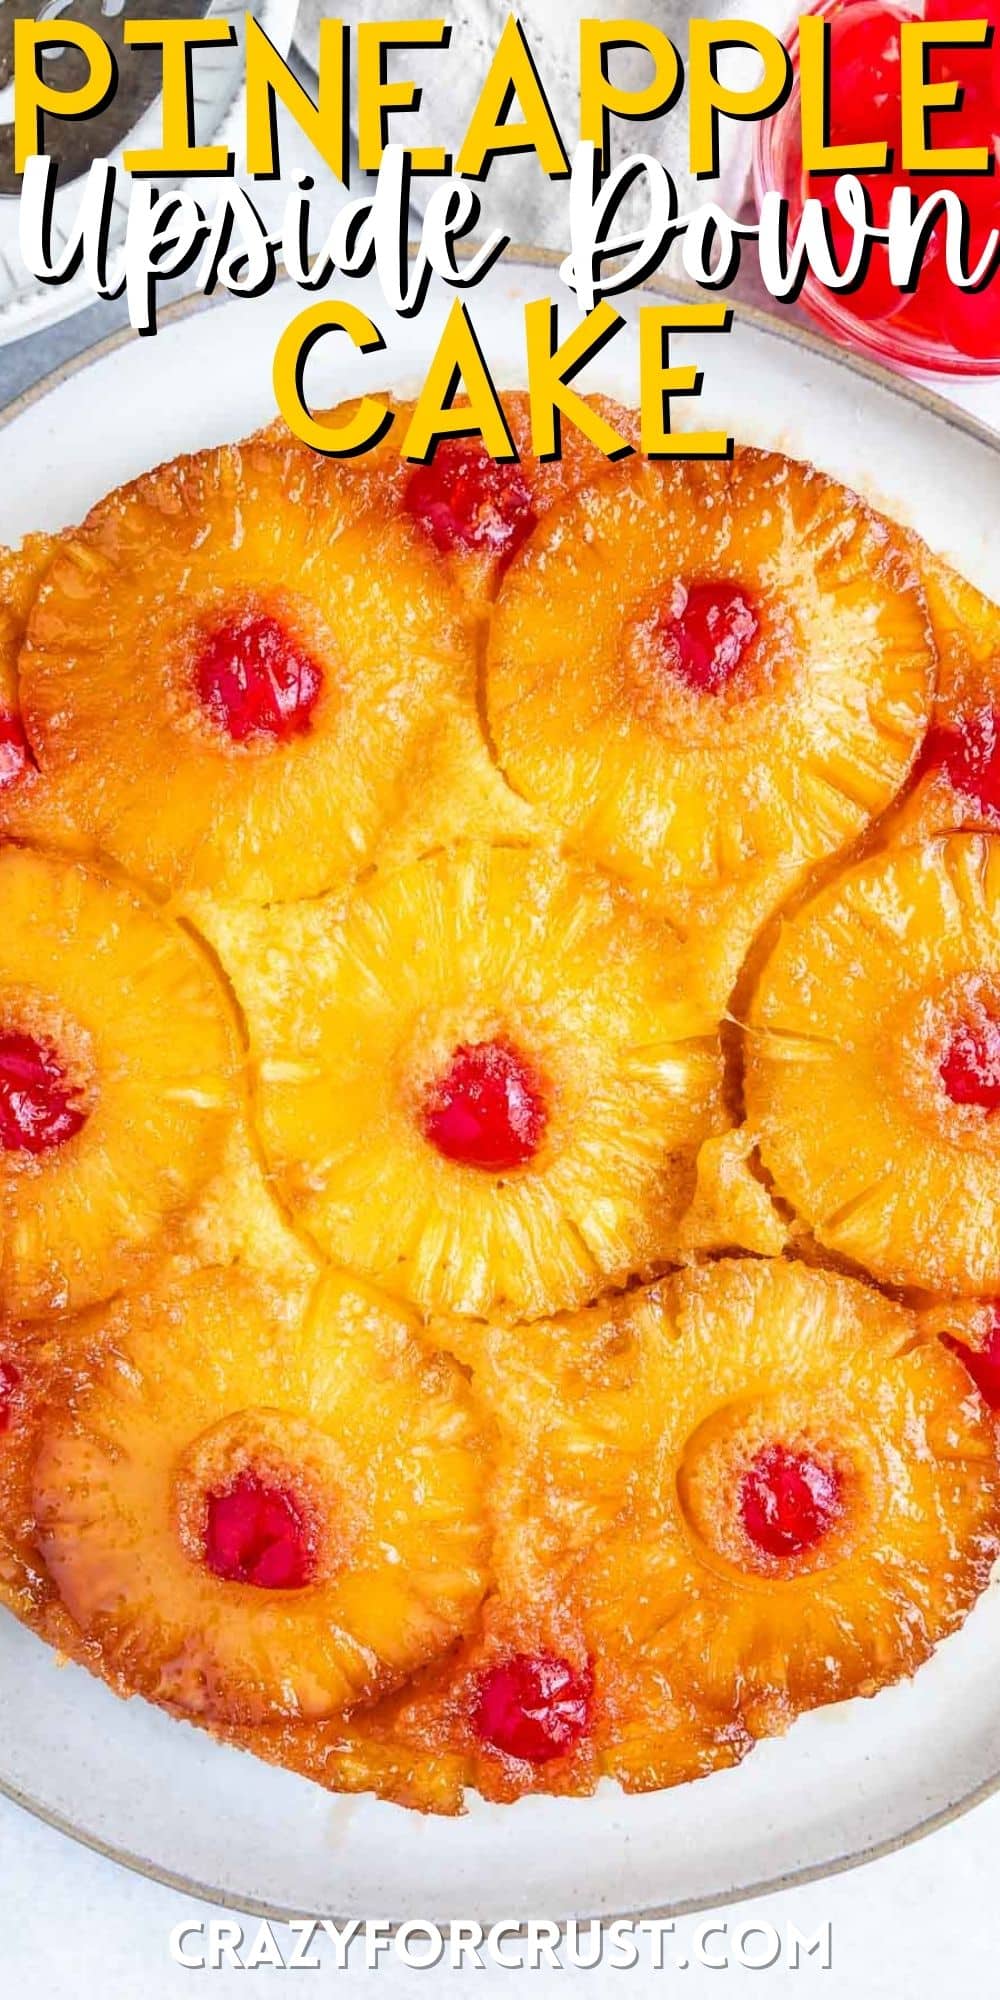 pineapple cake with cherries mixed in with words on the photo.